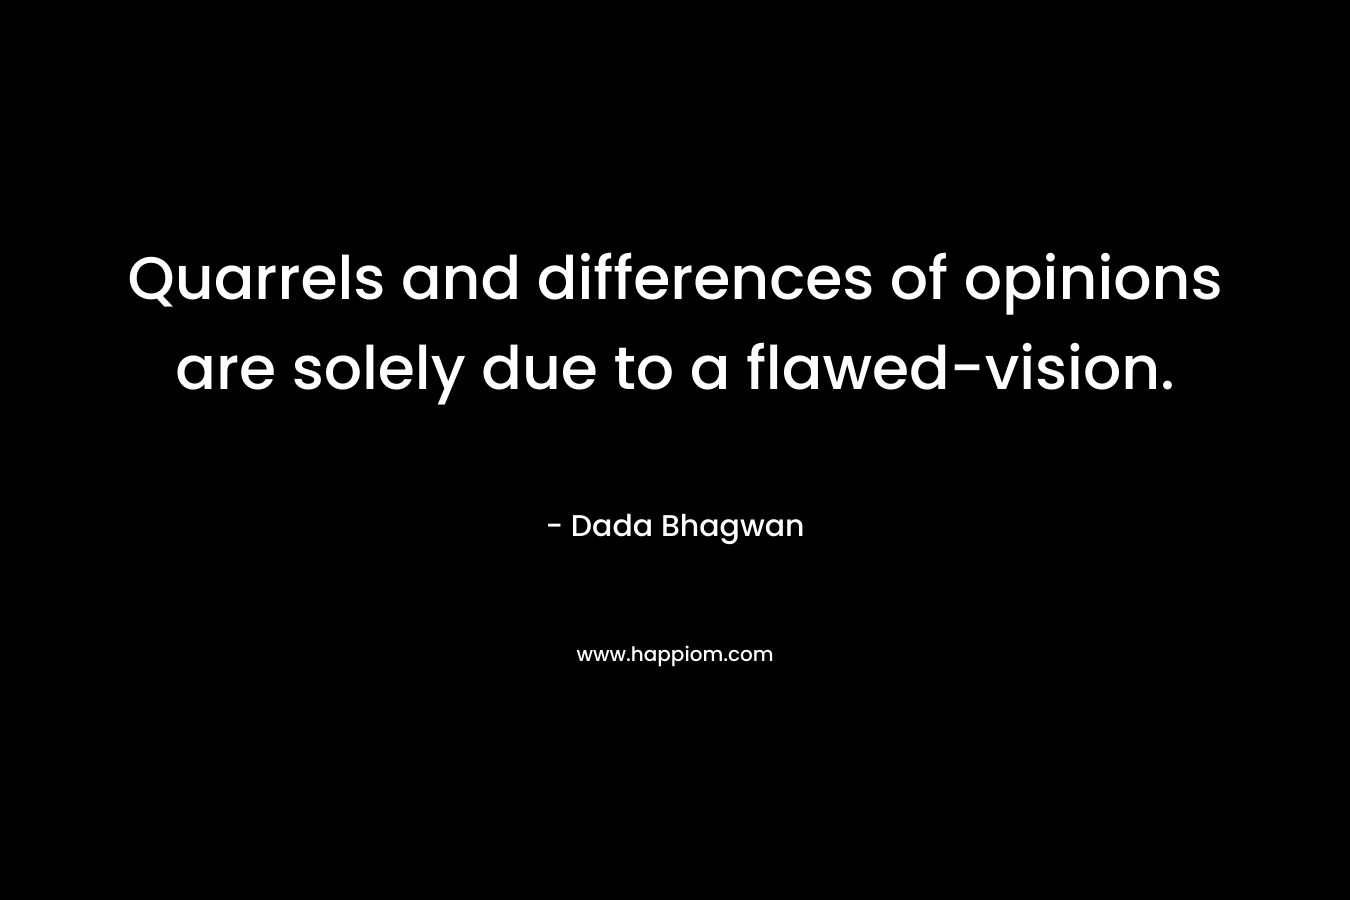 Quarrels and differences of opinions are solely due to a flawed-vision. – Dada Bhagwan